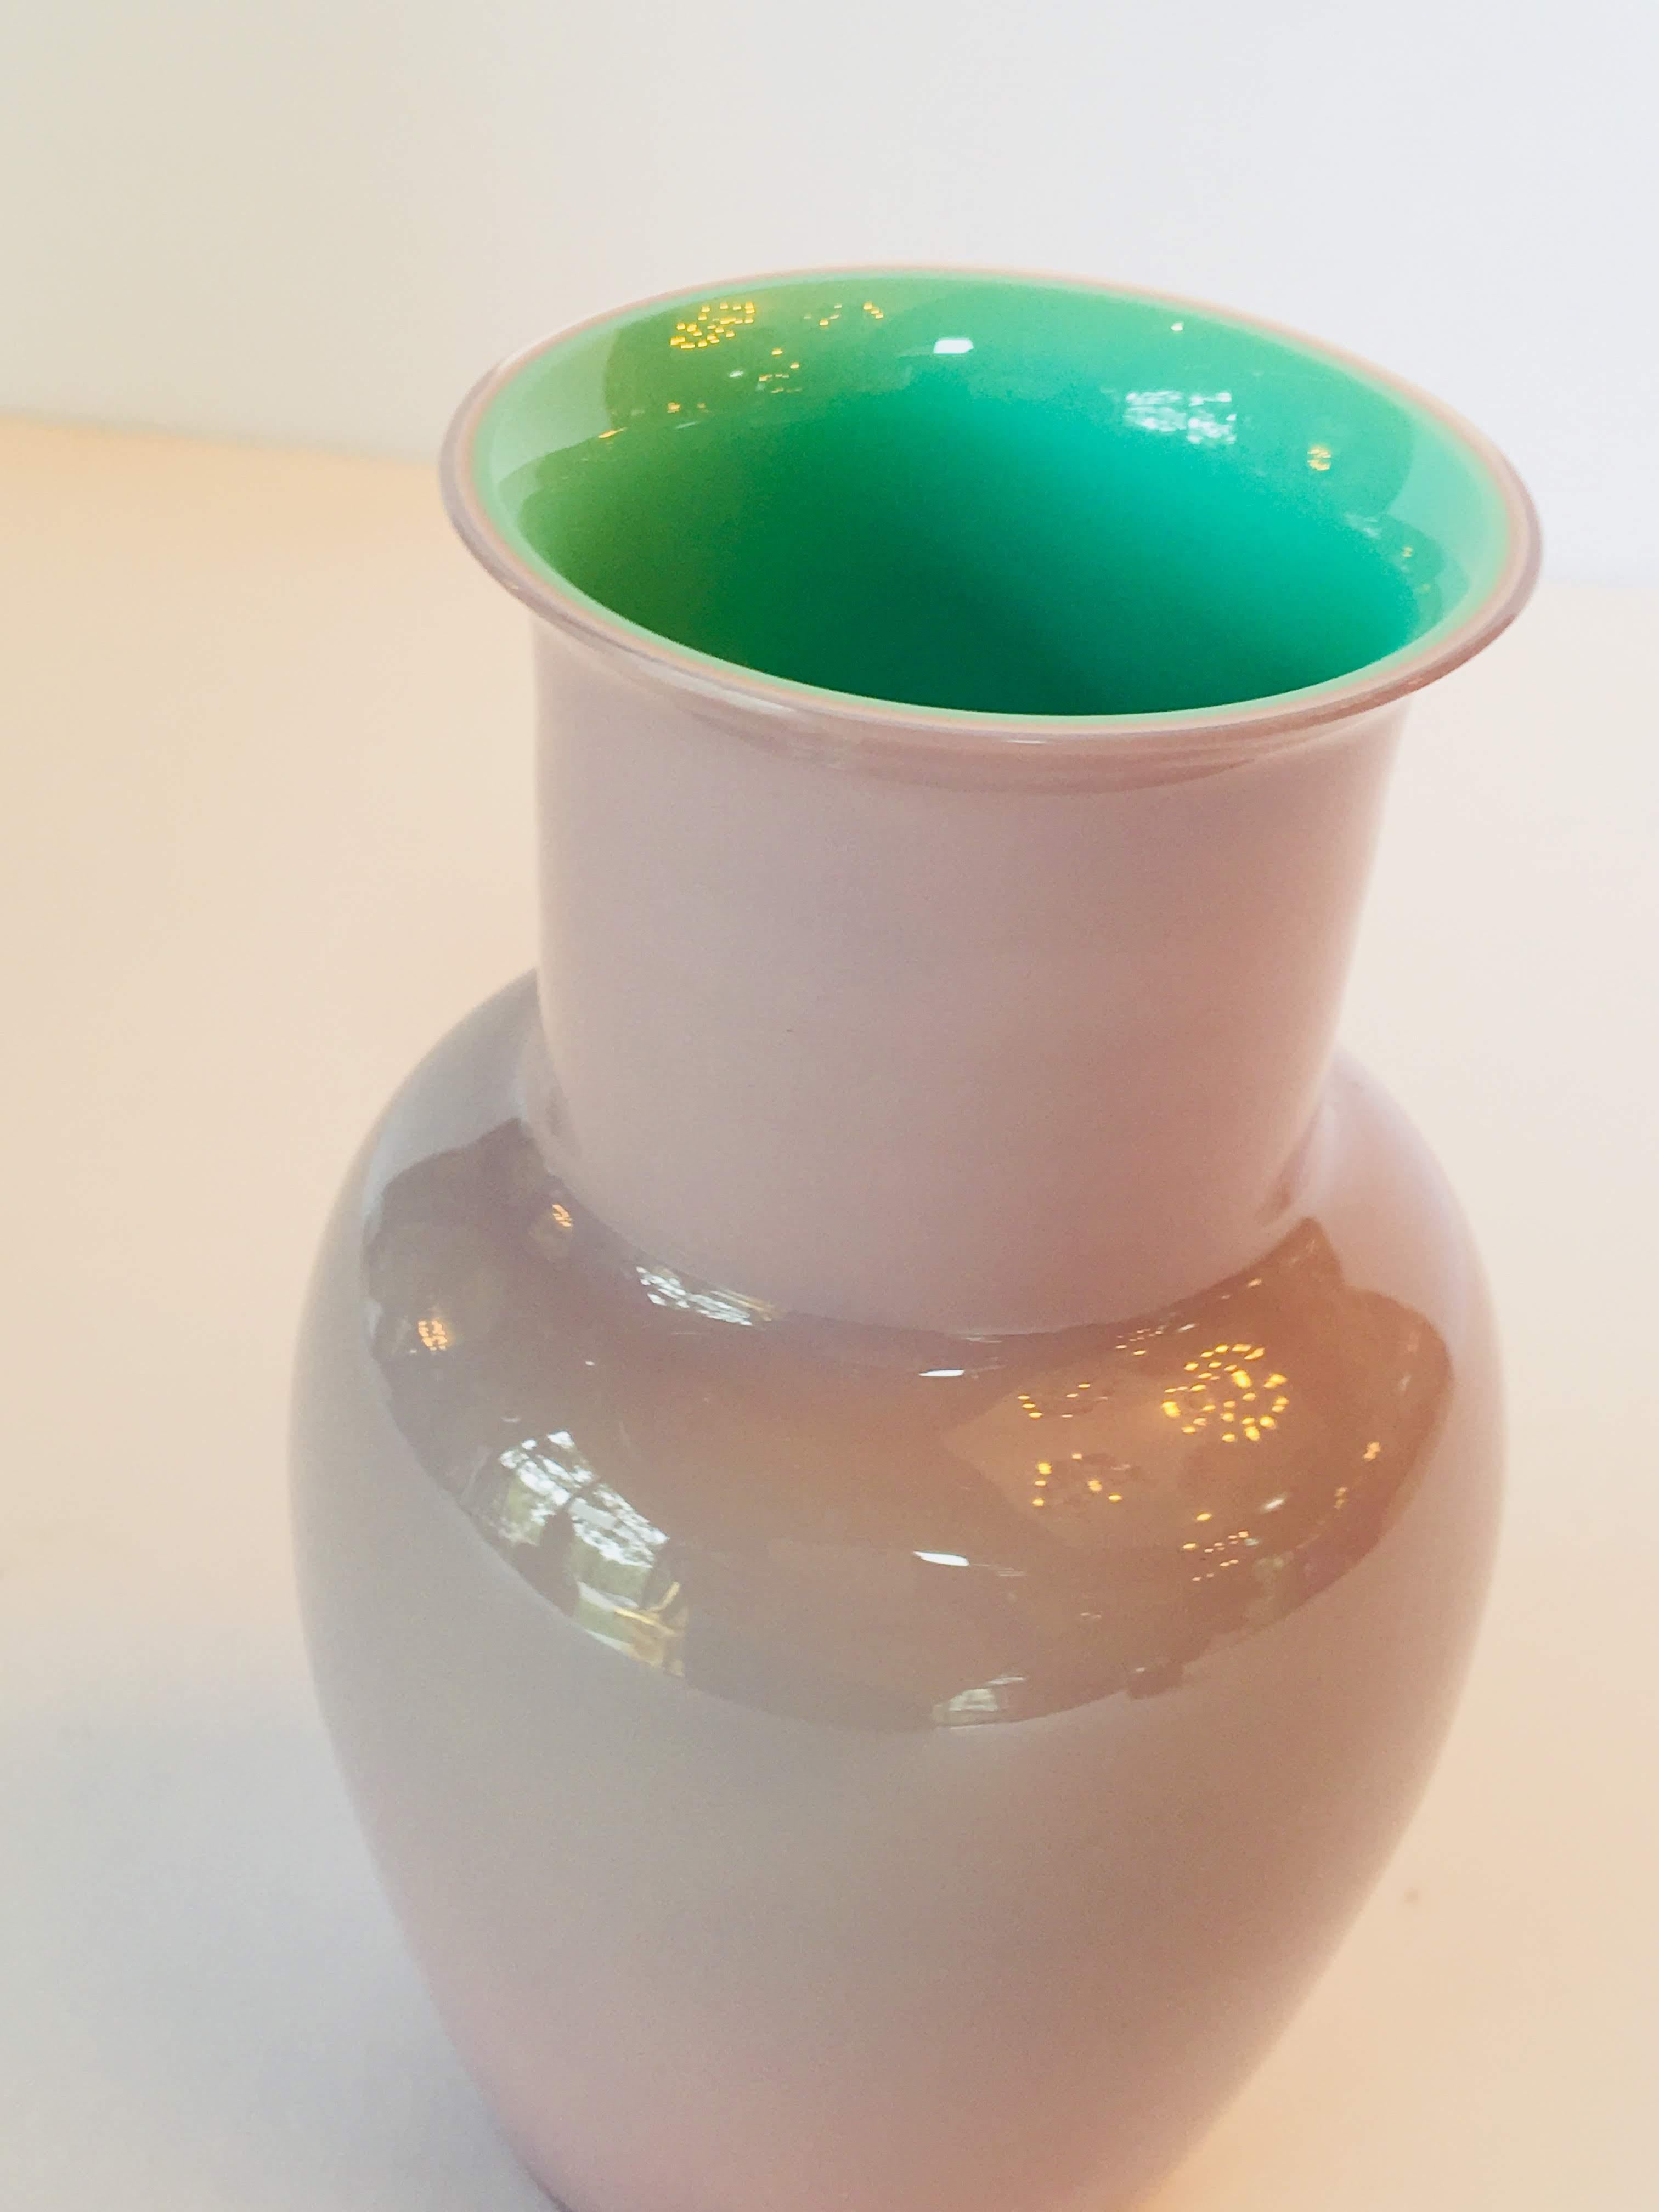 Carlo Moretti pale pink cased glass vase with green or blue interior.